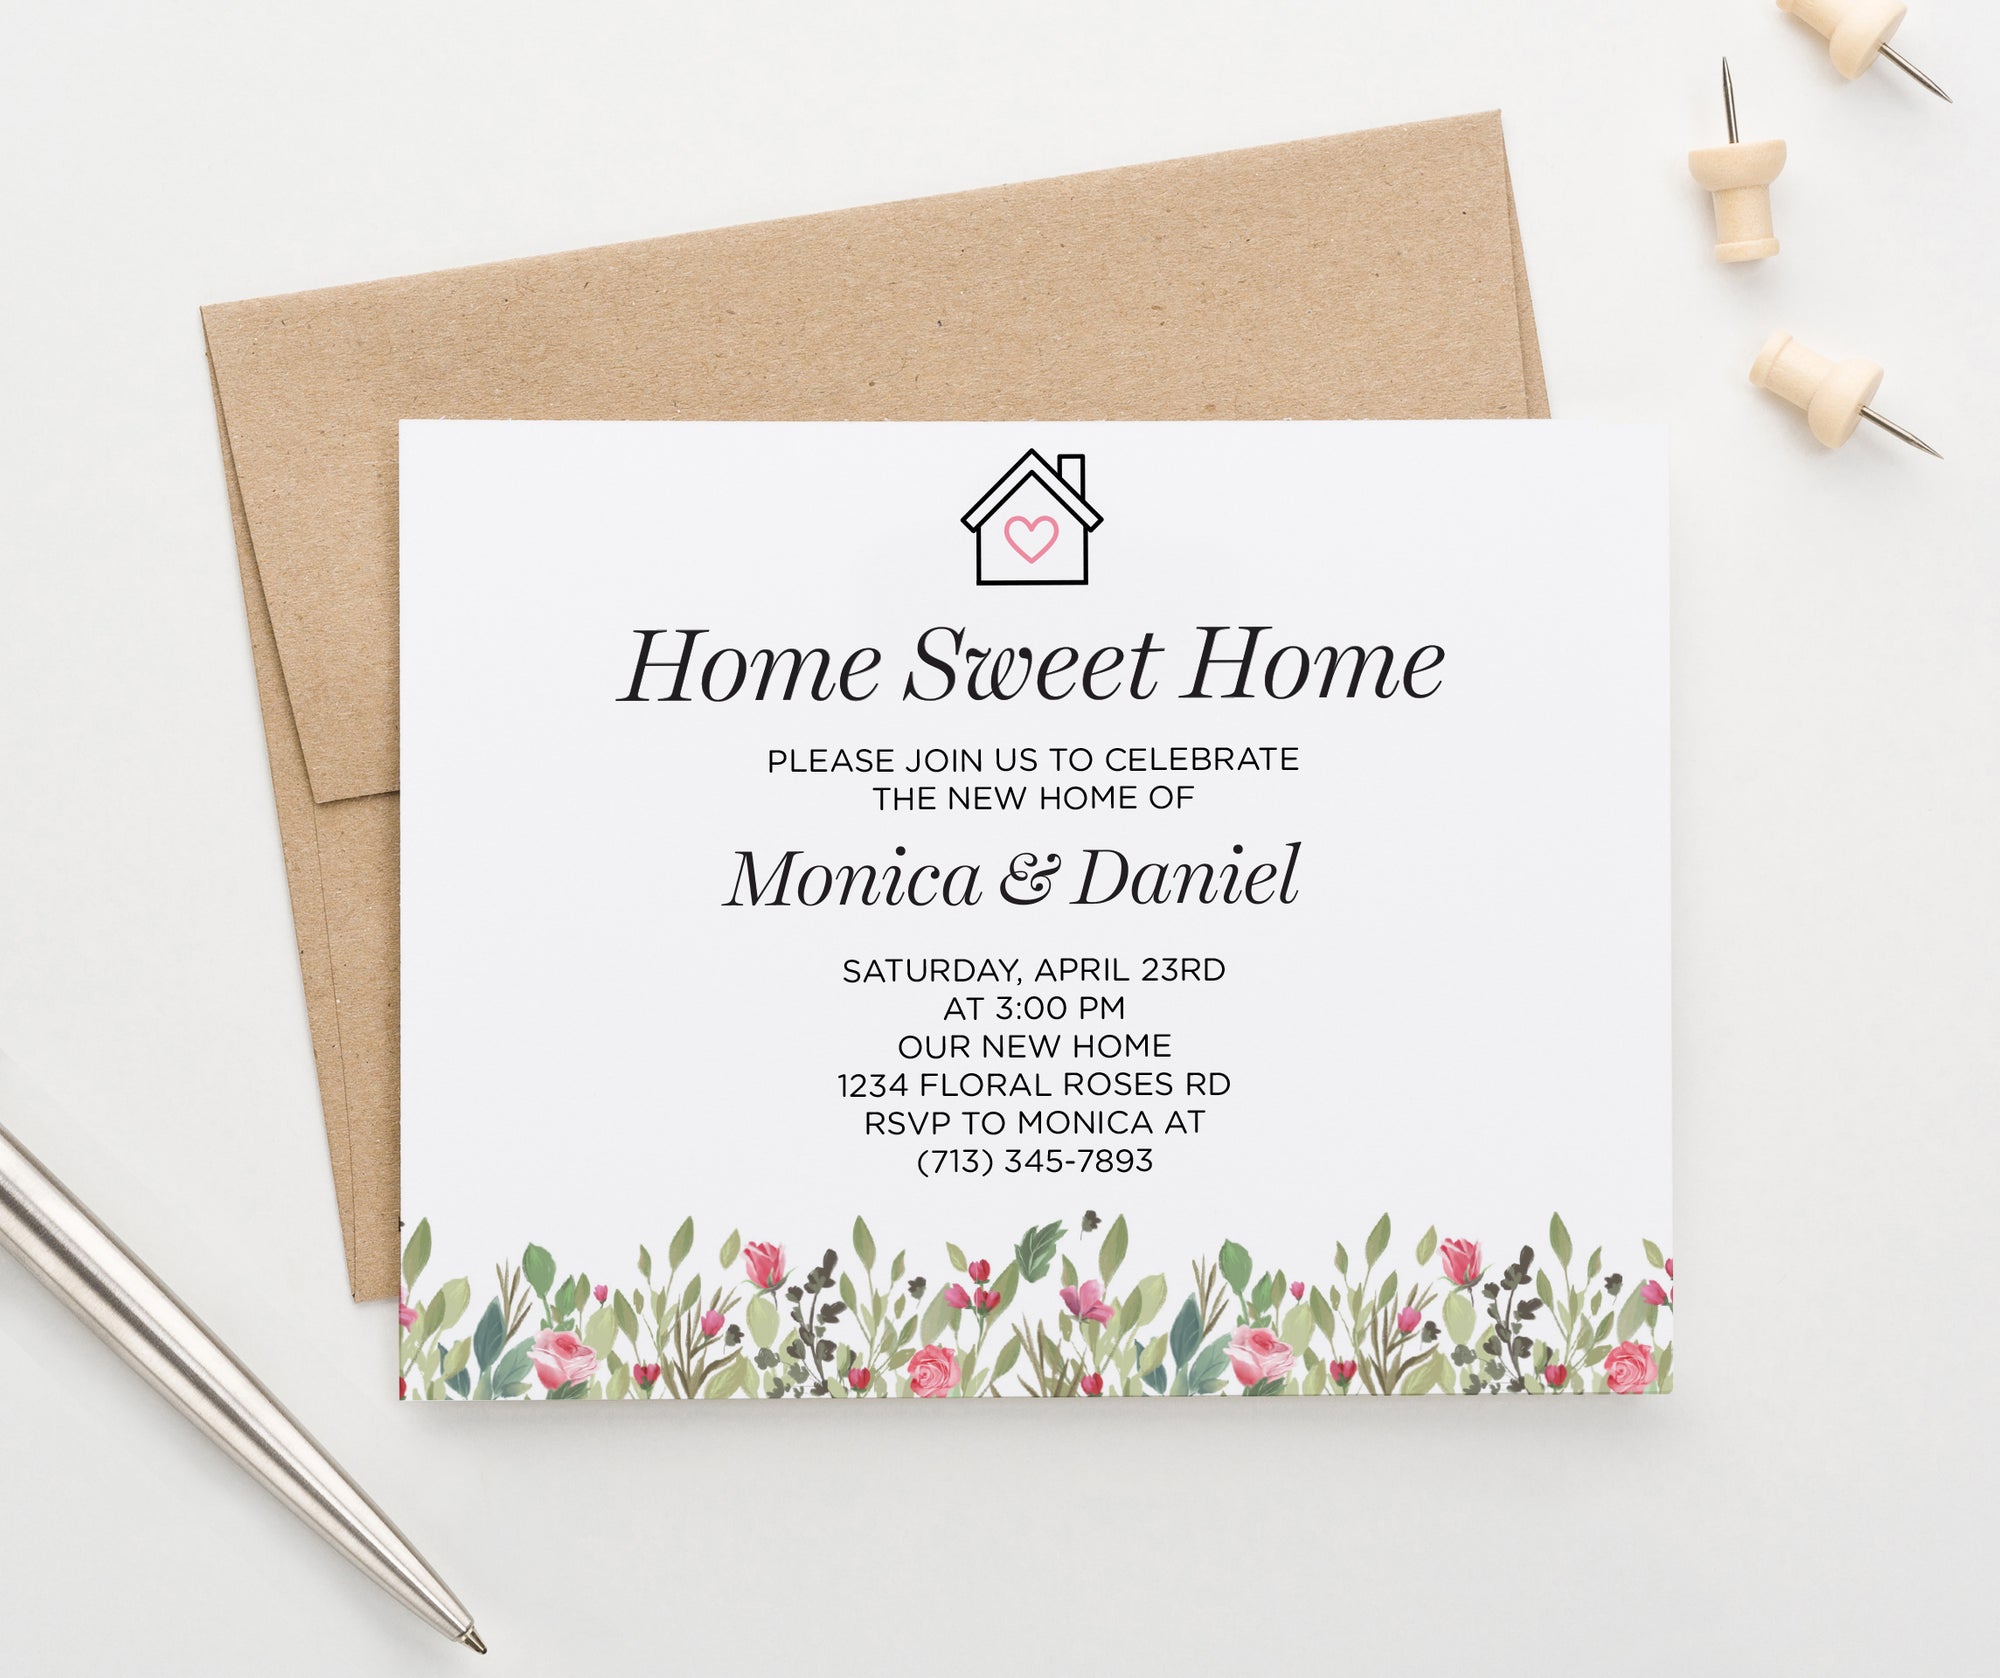 Personalized Housewarming Invitations With Pink Floral Greenery